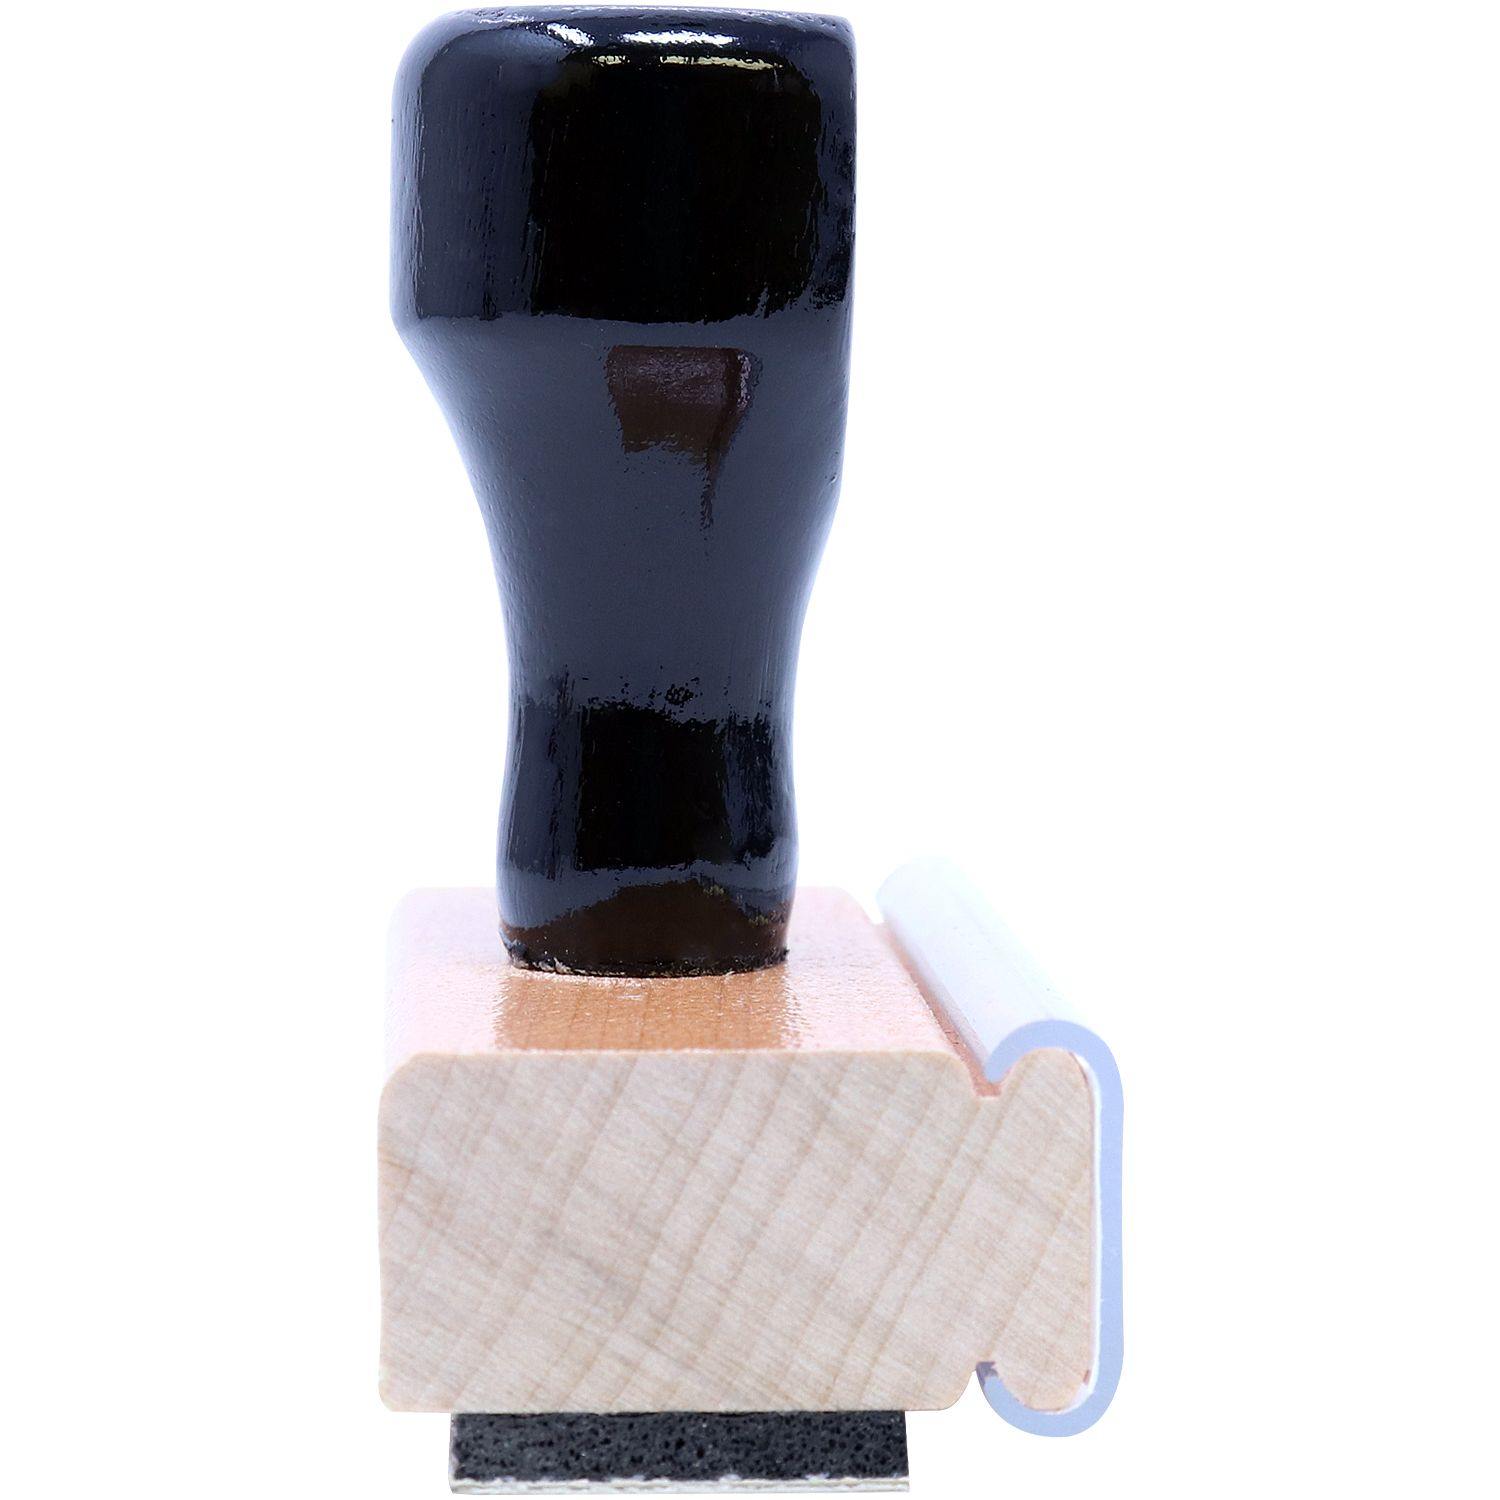 Side View of Large Judge's Copy Rubber Stamp